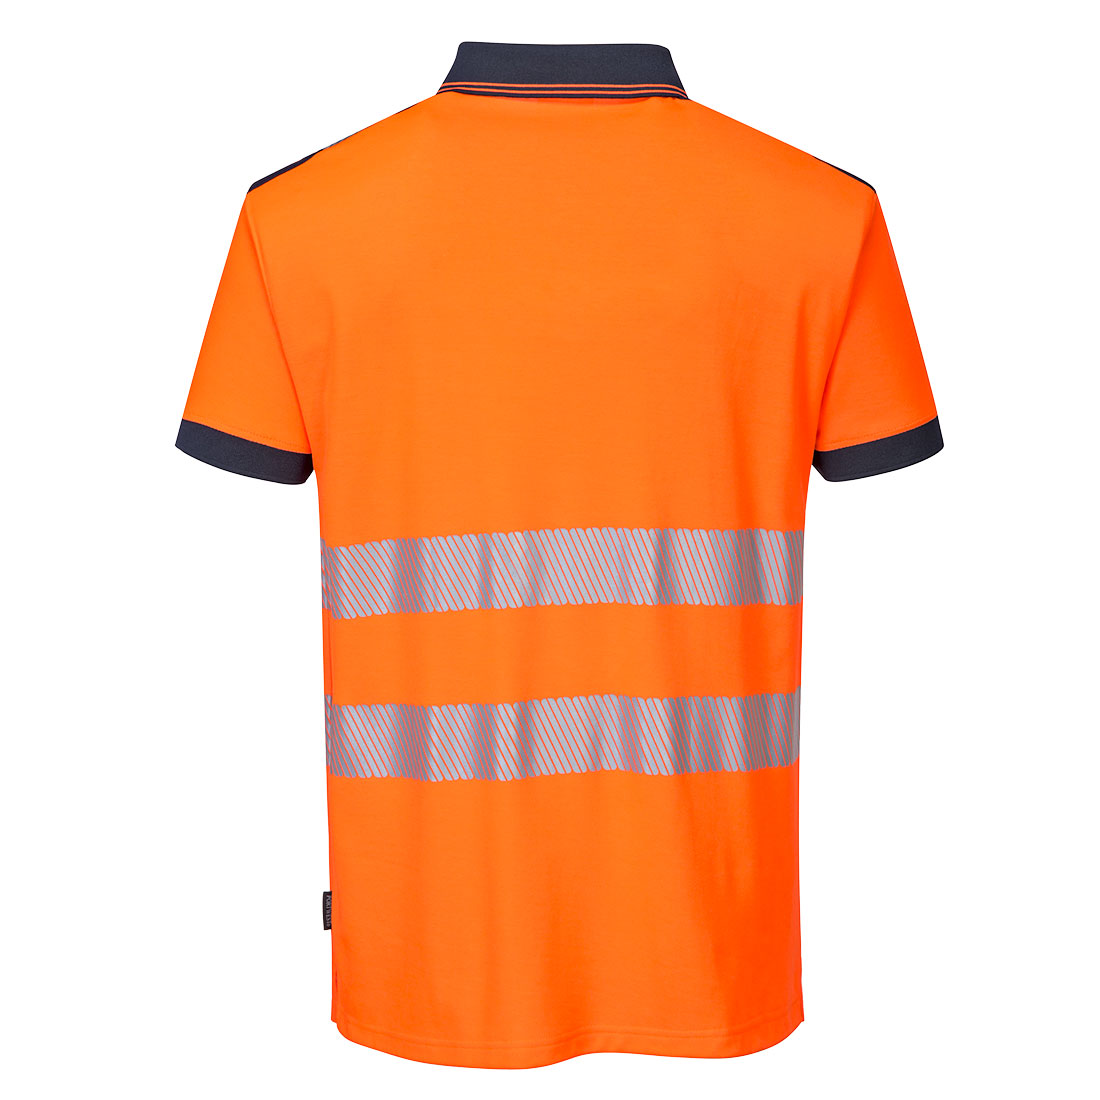 PORTWEST T180 PW3 HiVis Polo Shirt Short Sleeve Work CE Safety Top Comfort - Hamtons Direct